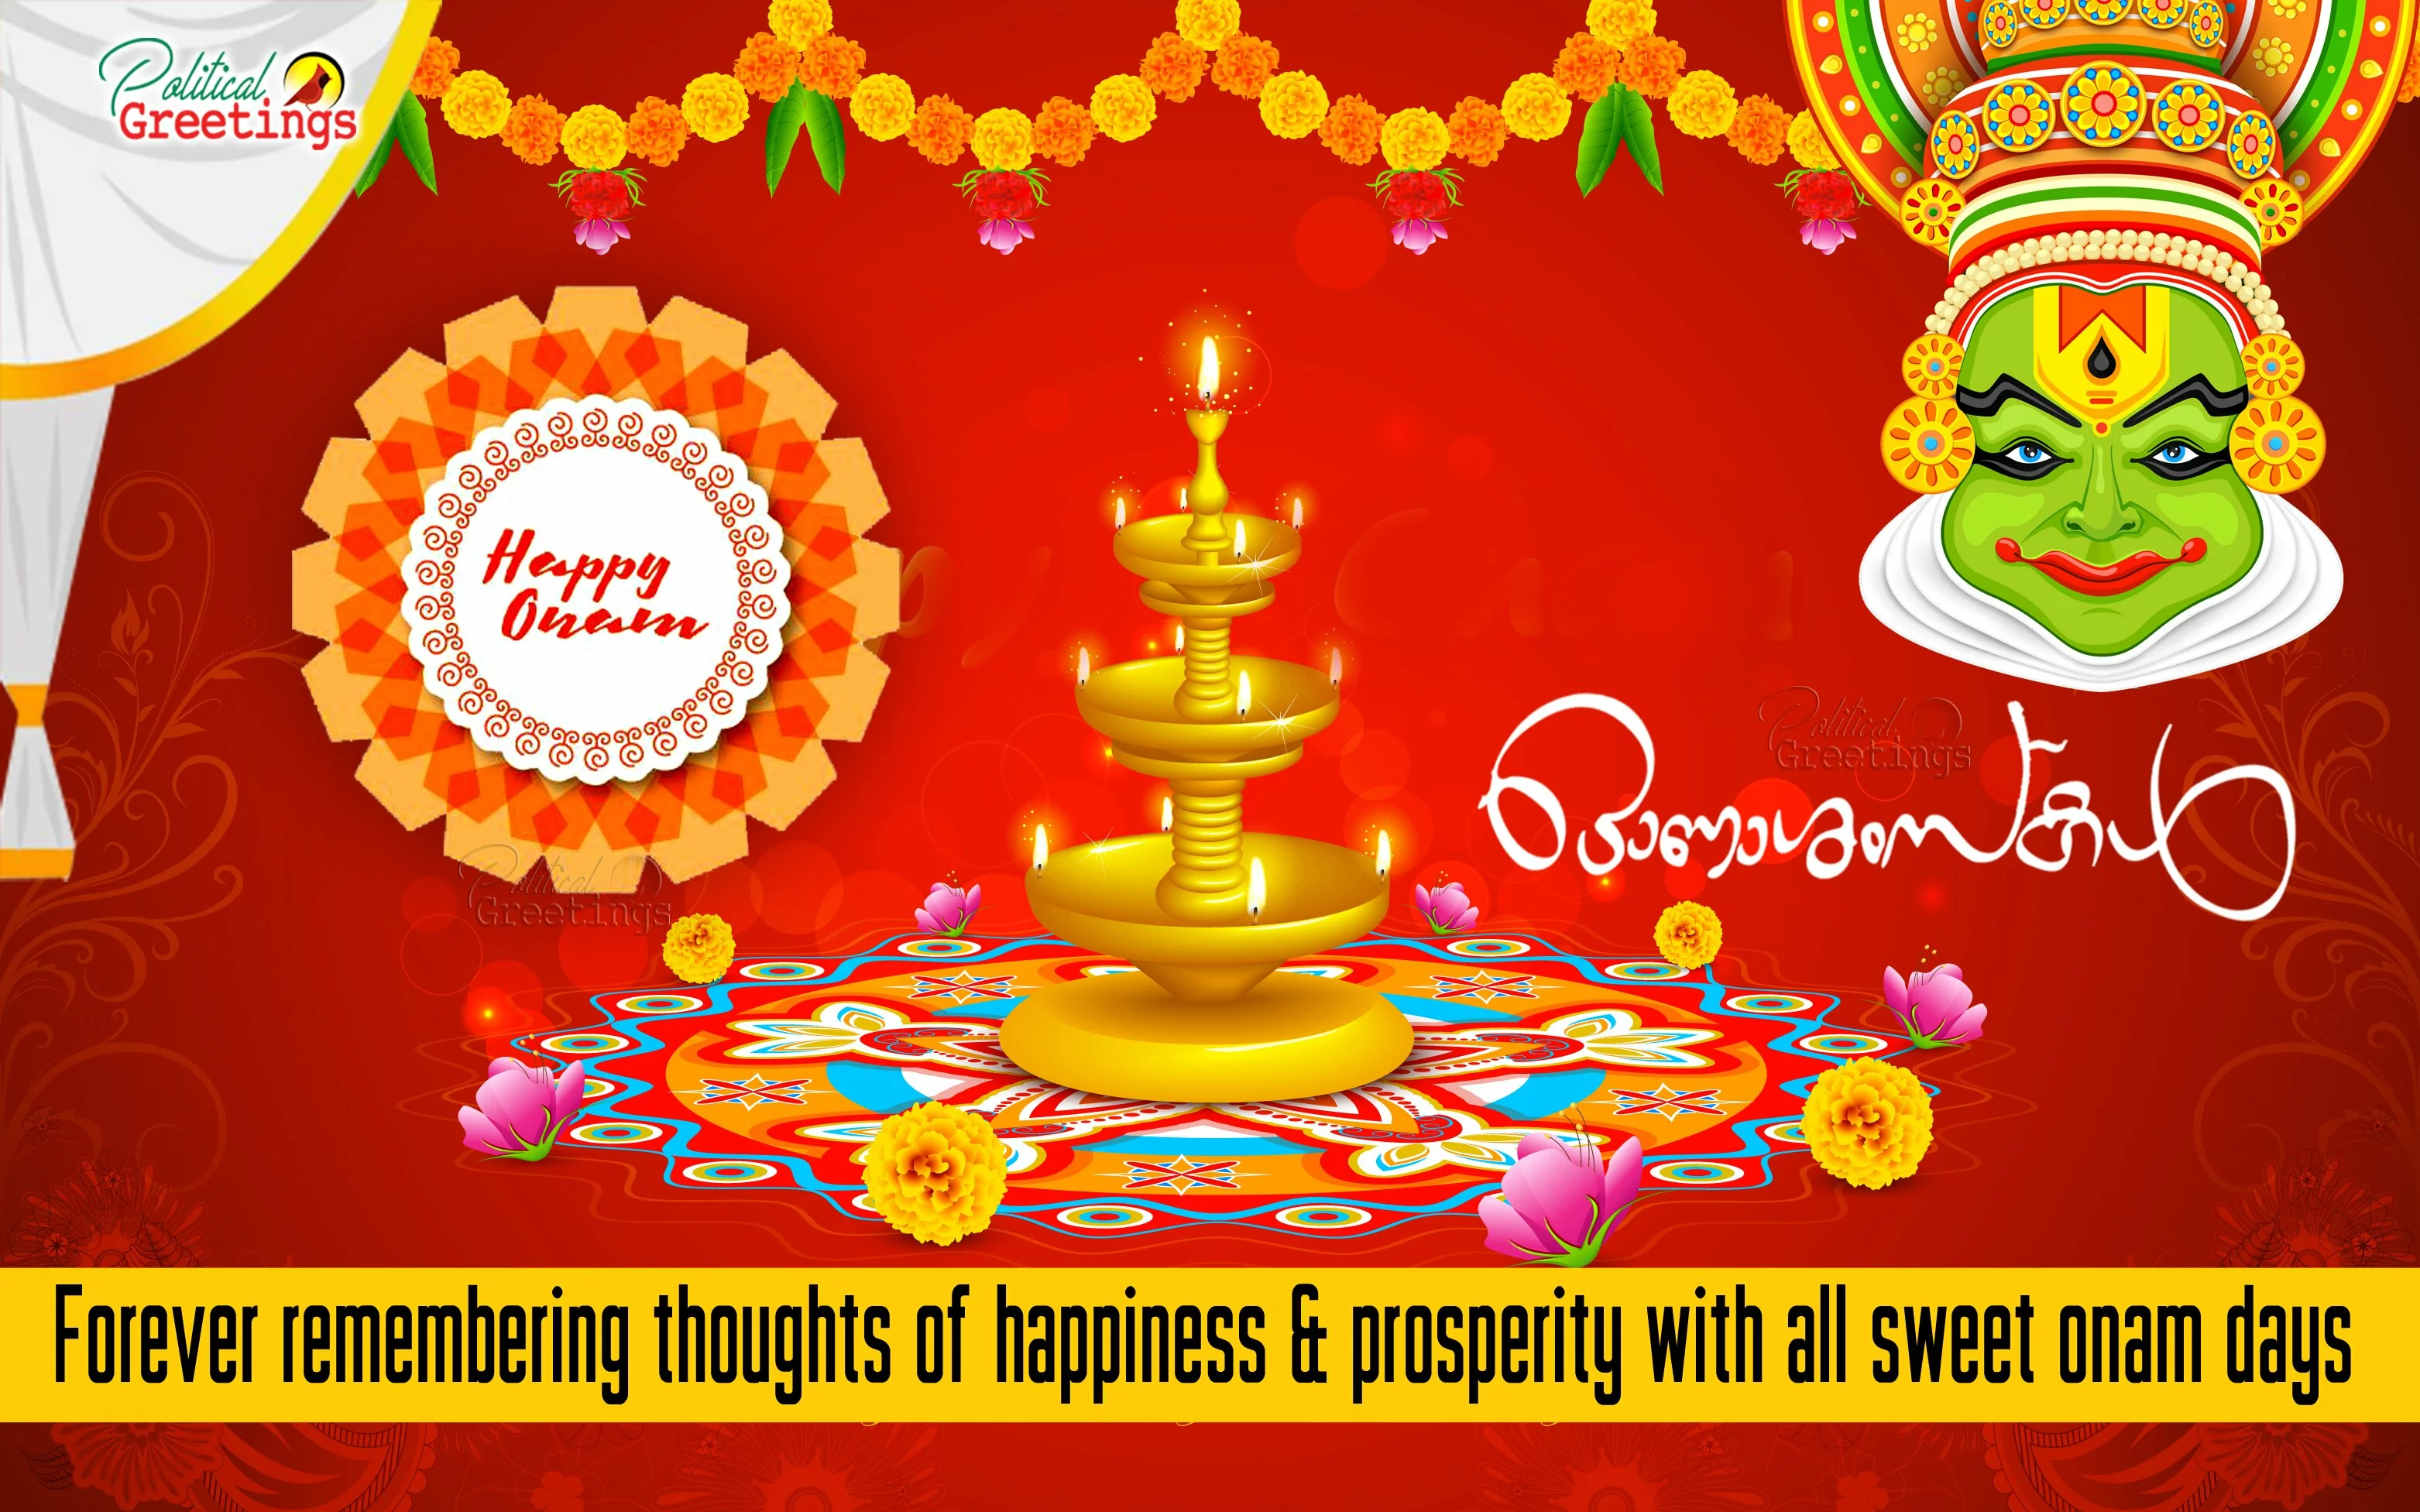 Beautiful Onam Greeting Card Designs and Onam Wishes Pictures